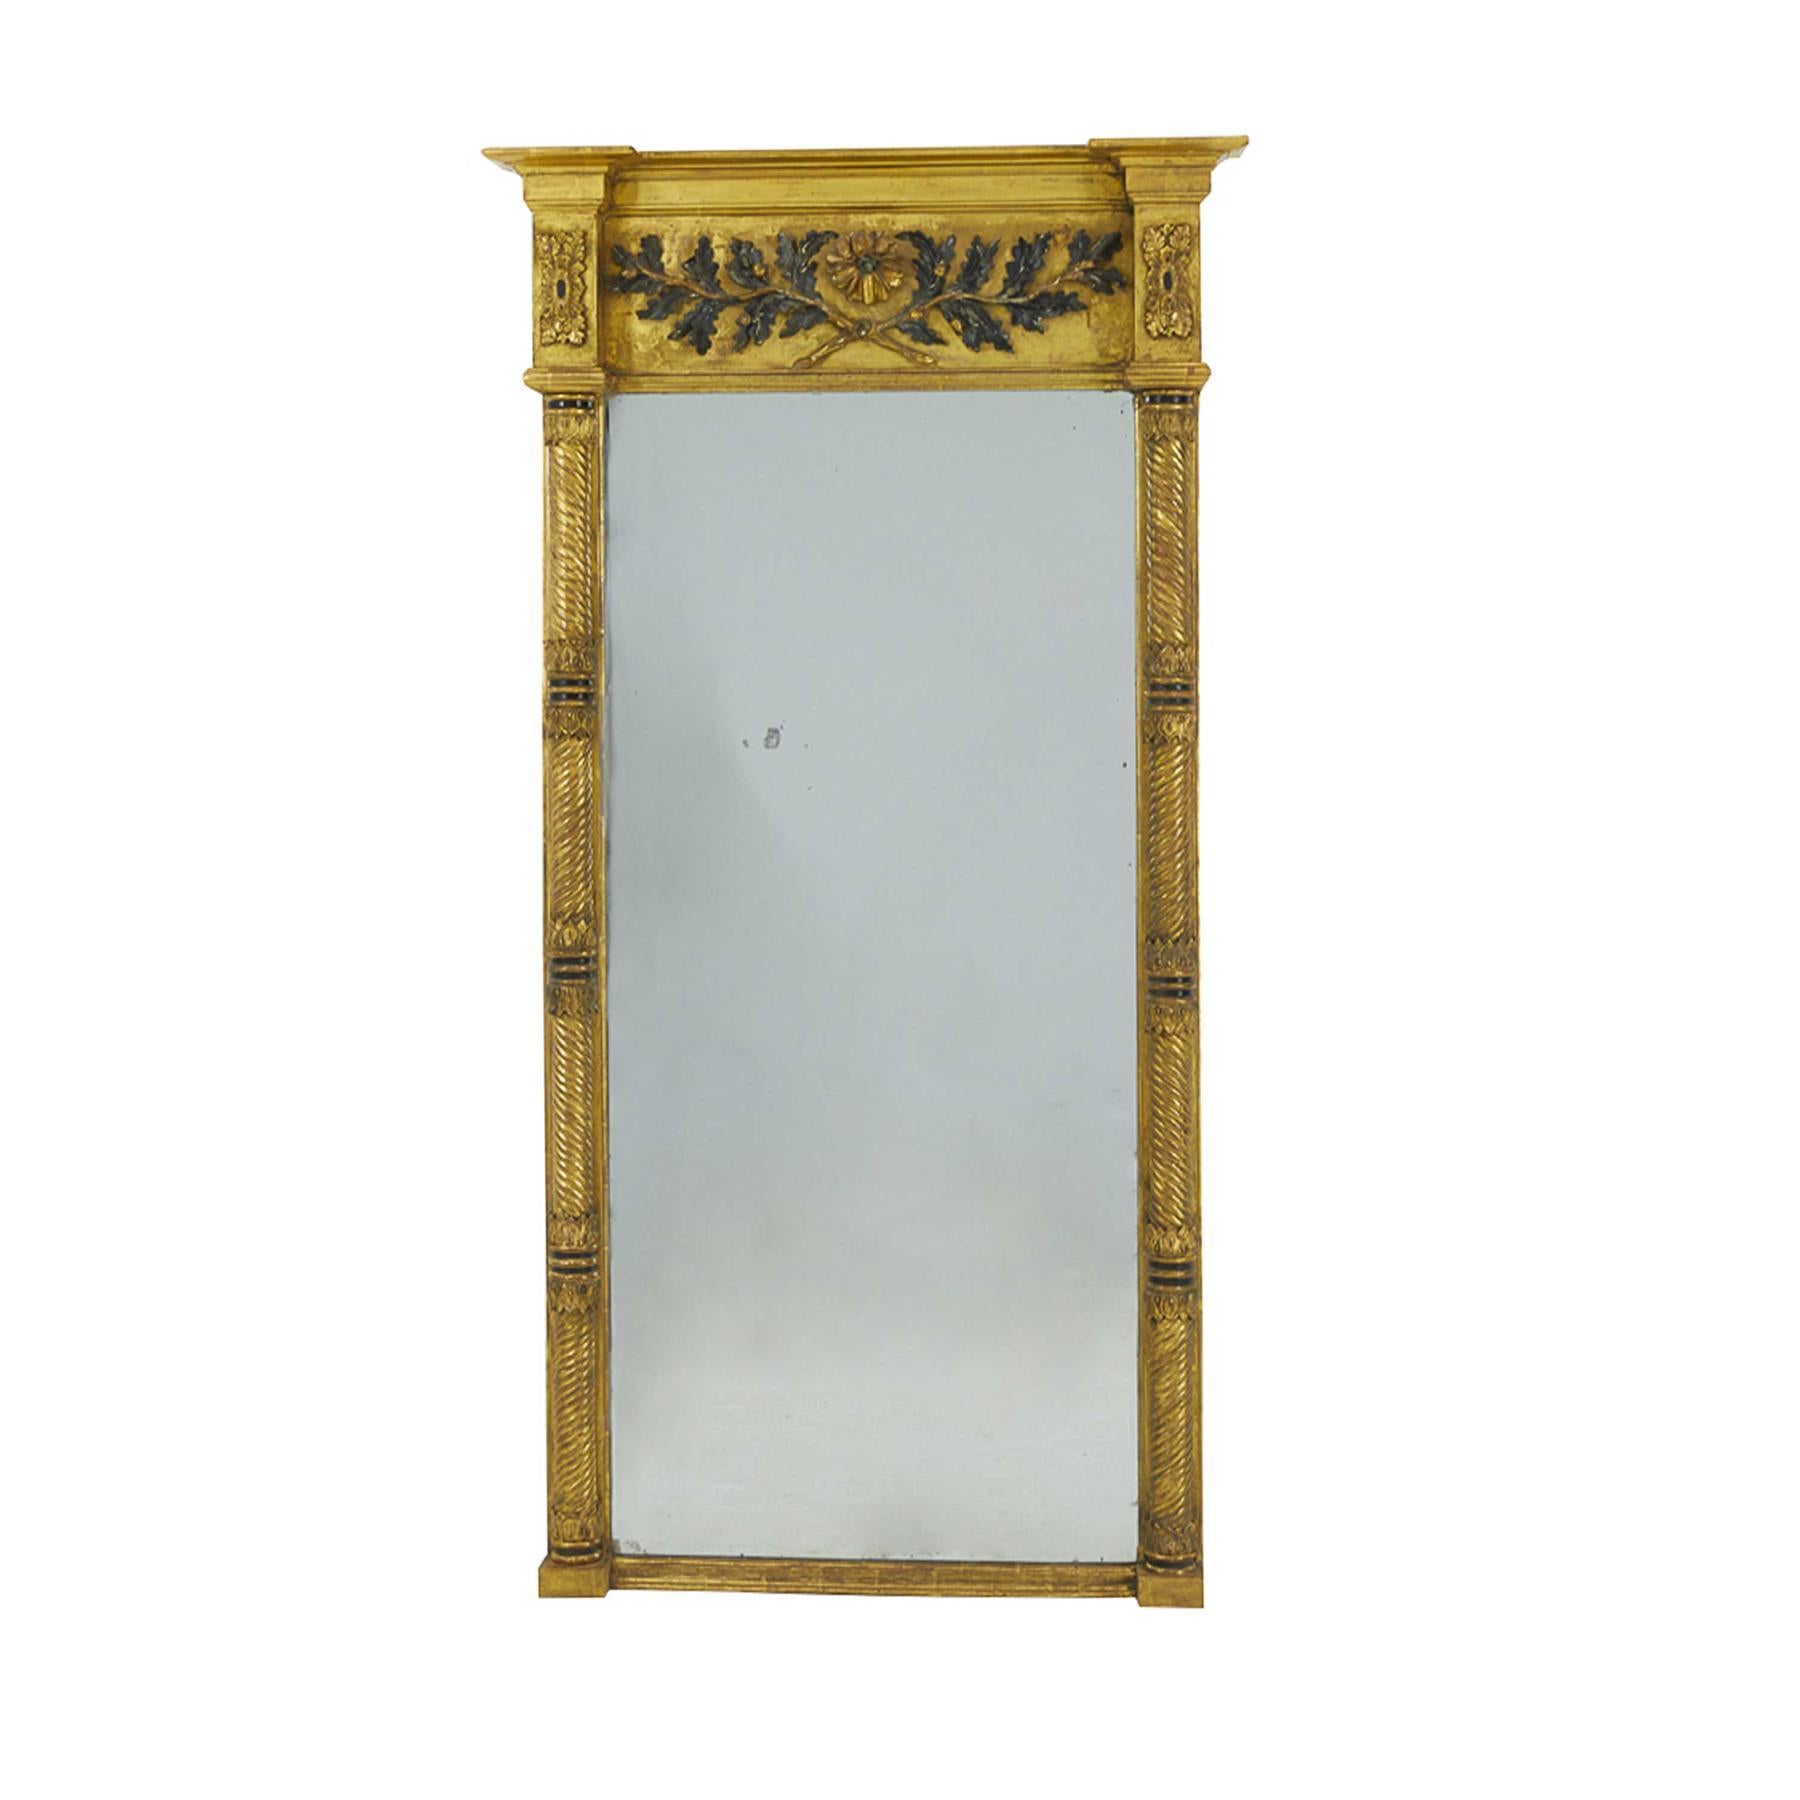 A stunning 1830s English pier mirror with carved decoration and wonderful gilding.